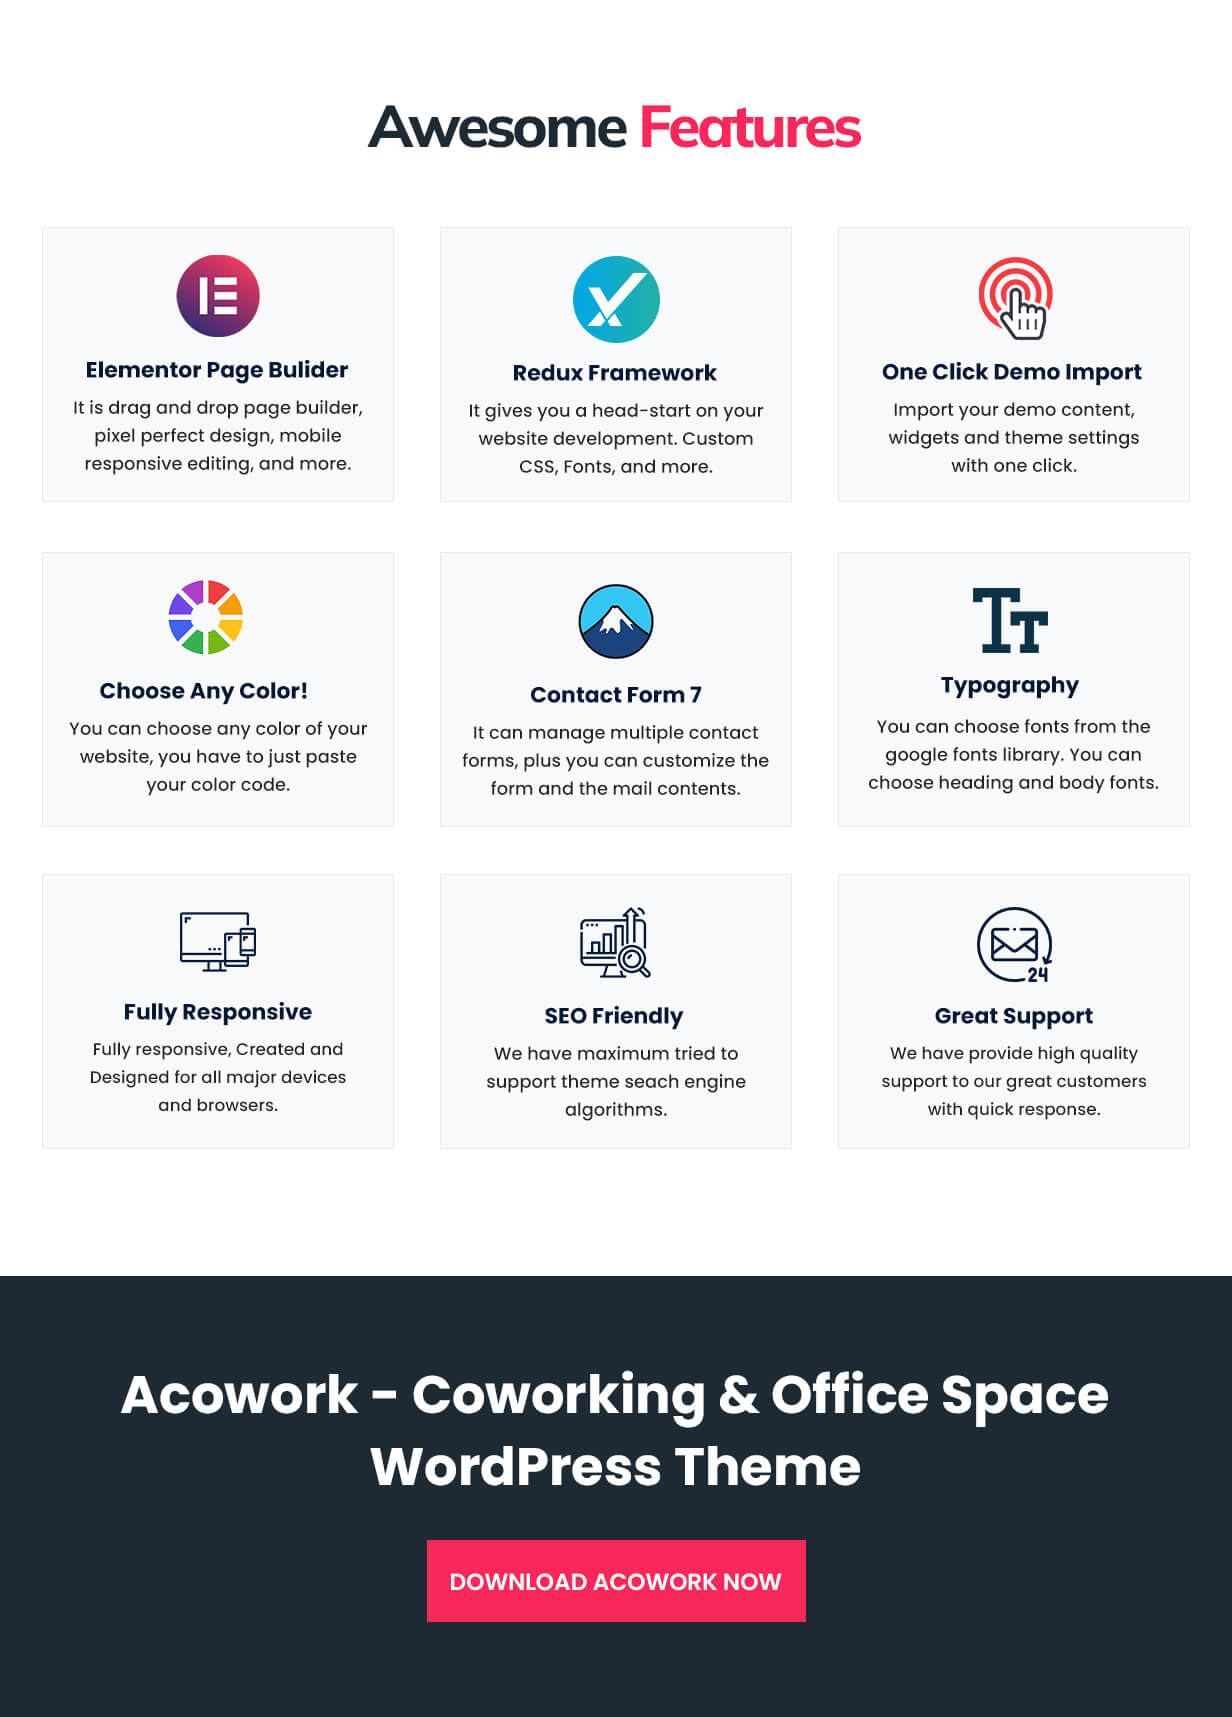 Coworking and Office Space WordPress Theme